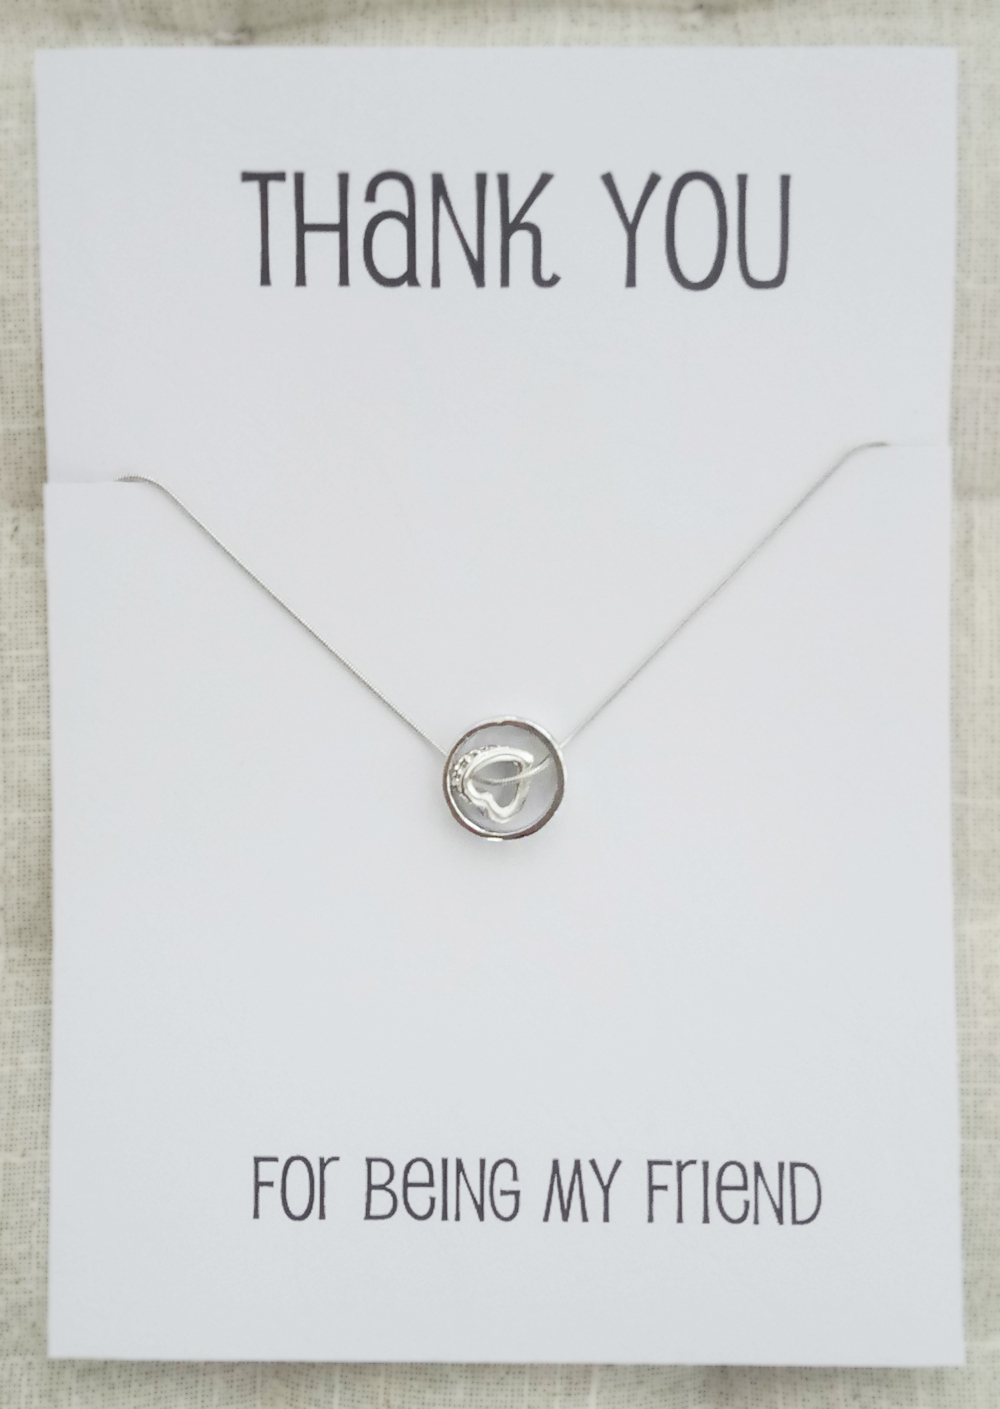 Thank You For Being My Friend Gift Card Heart And Ring Pendants Rhinestones Silver Toned Woman Fashion Necklace